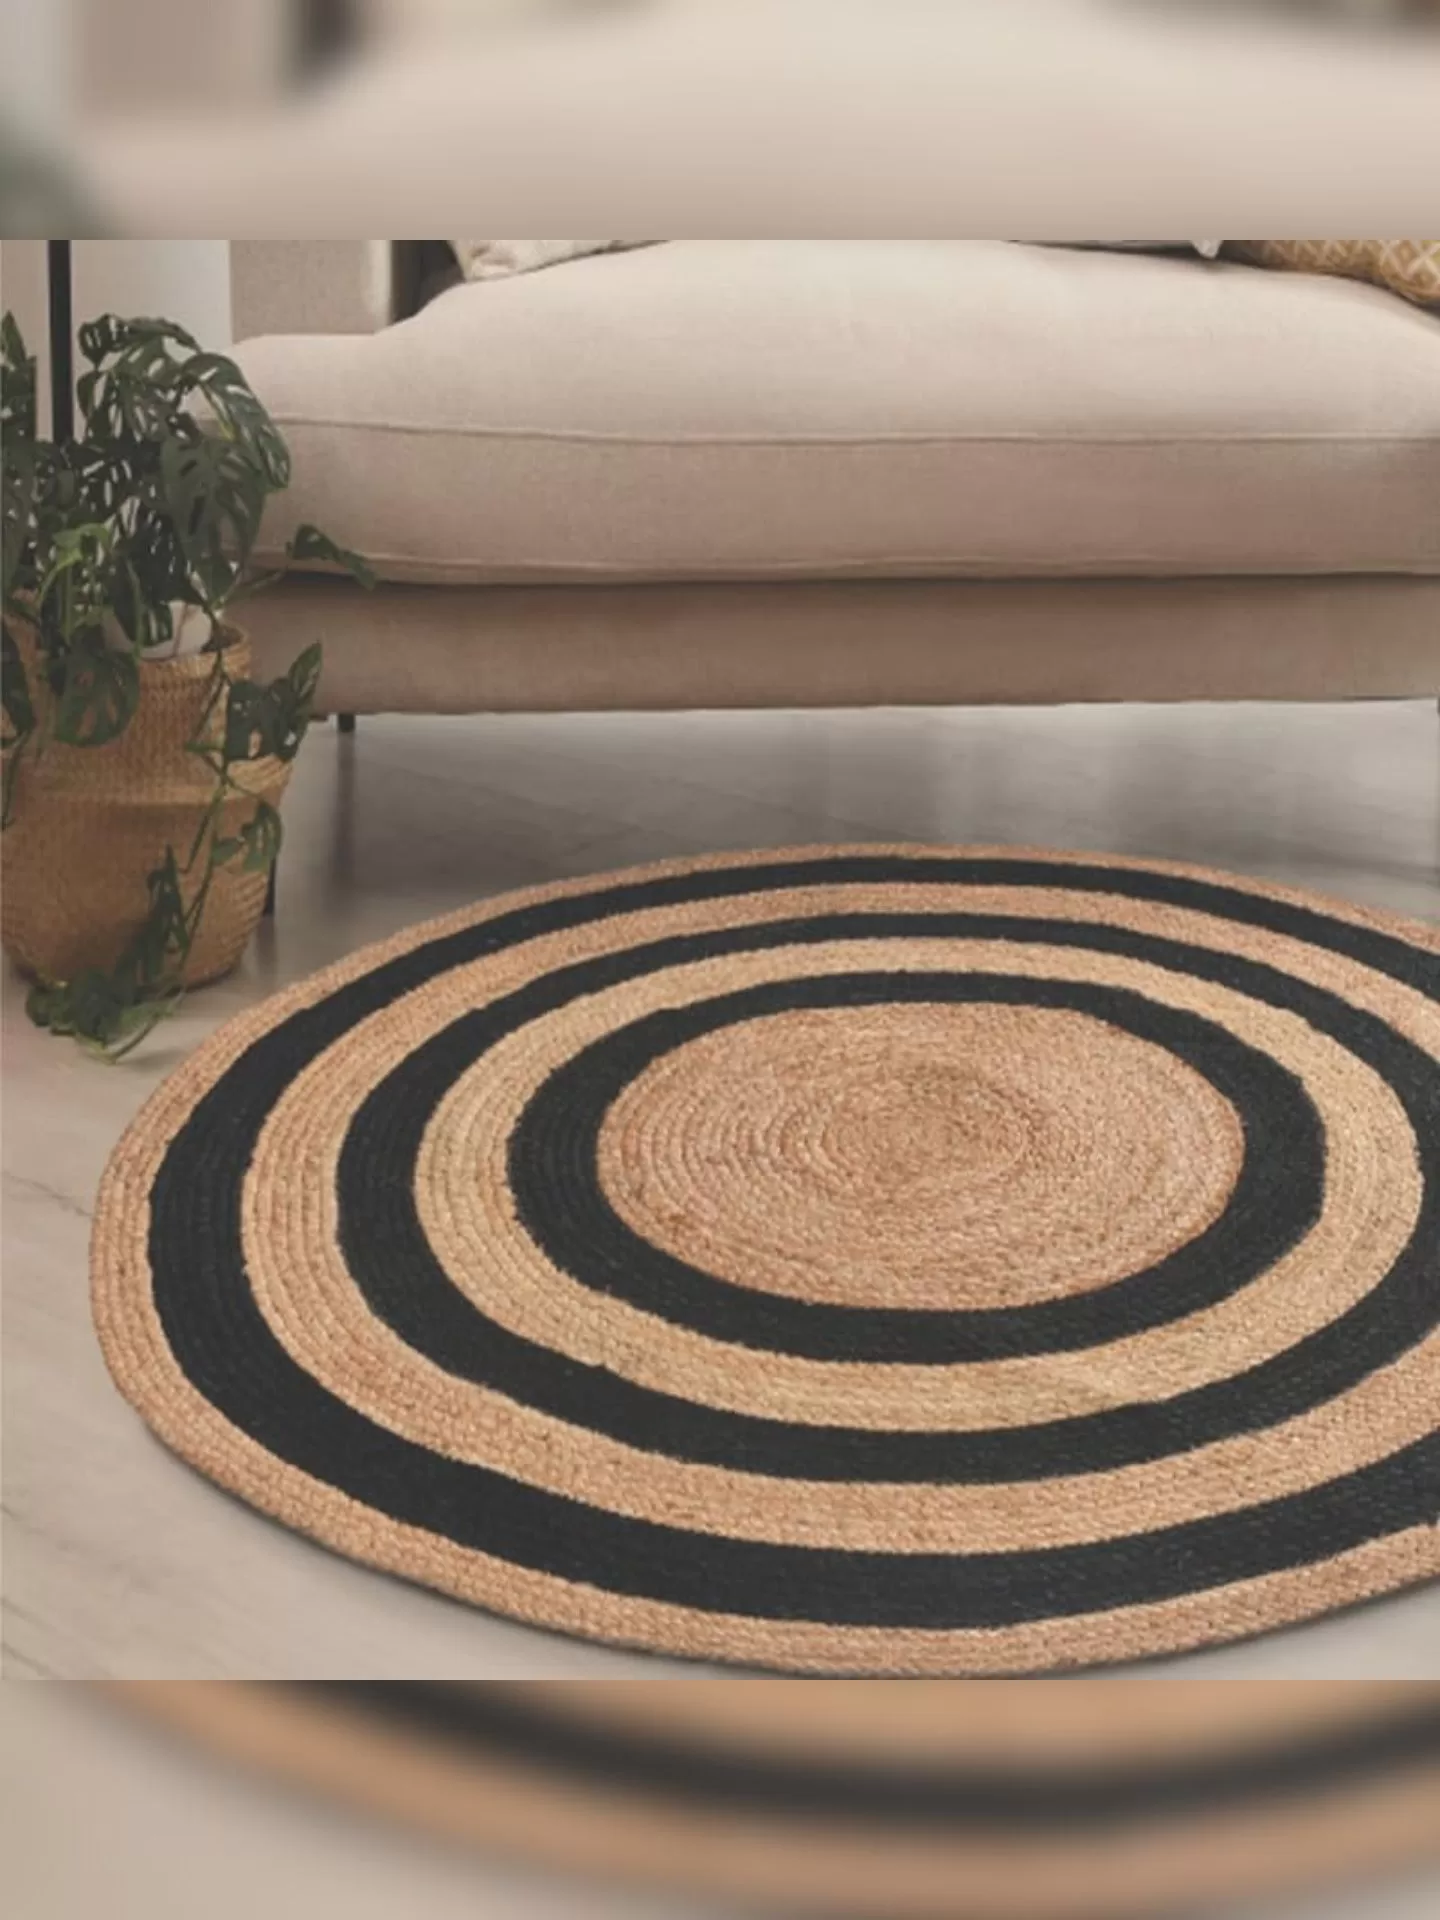 Buy Multicolor Rugs Online, Buy Rugs Online, Washable Cotton Rugs Online